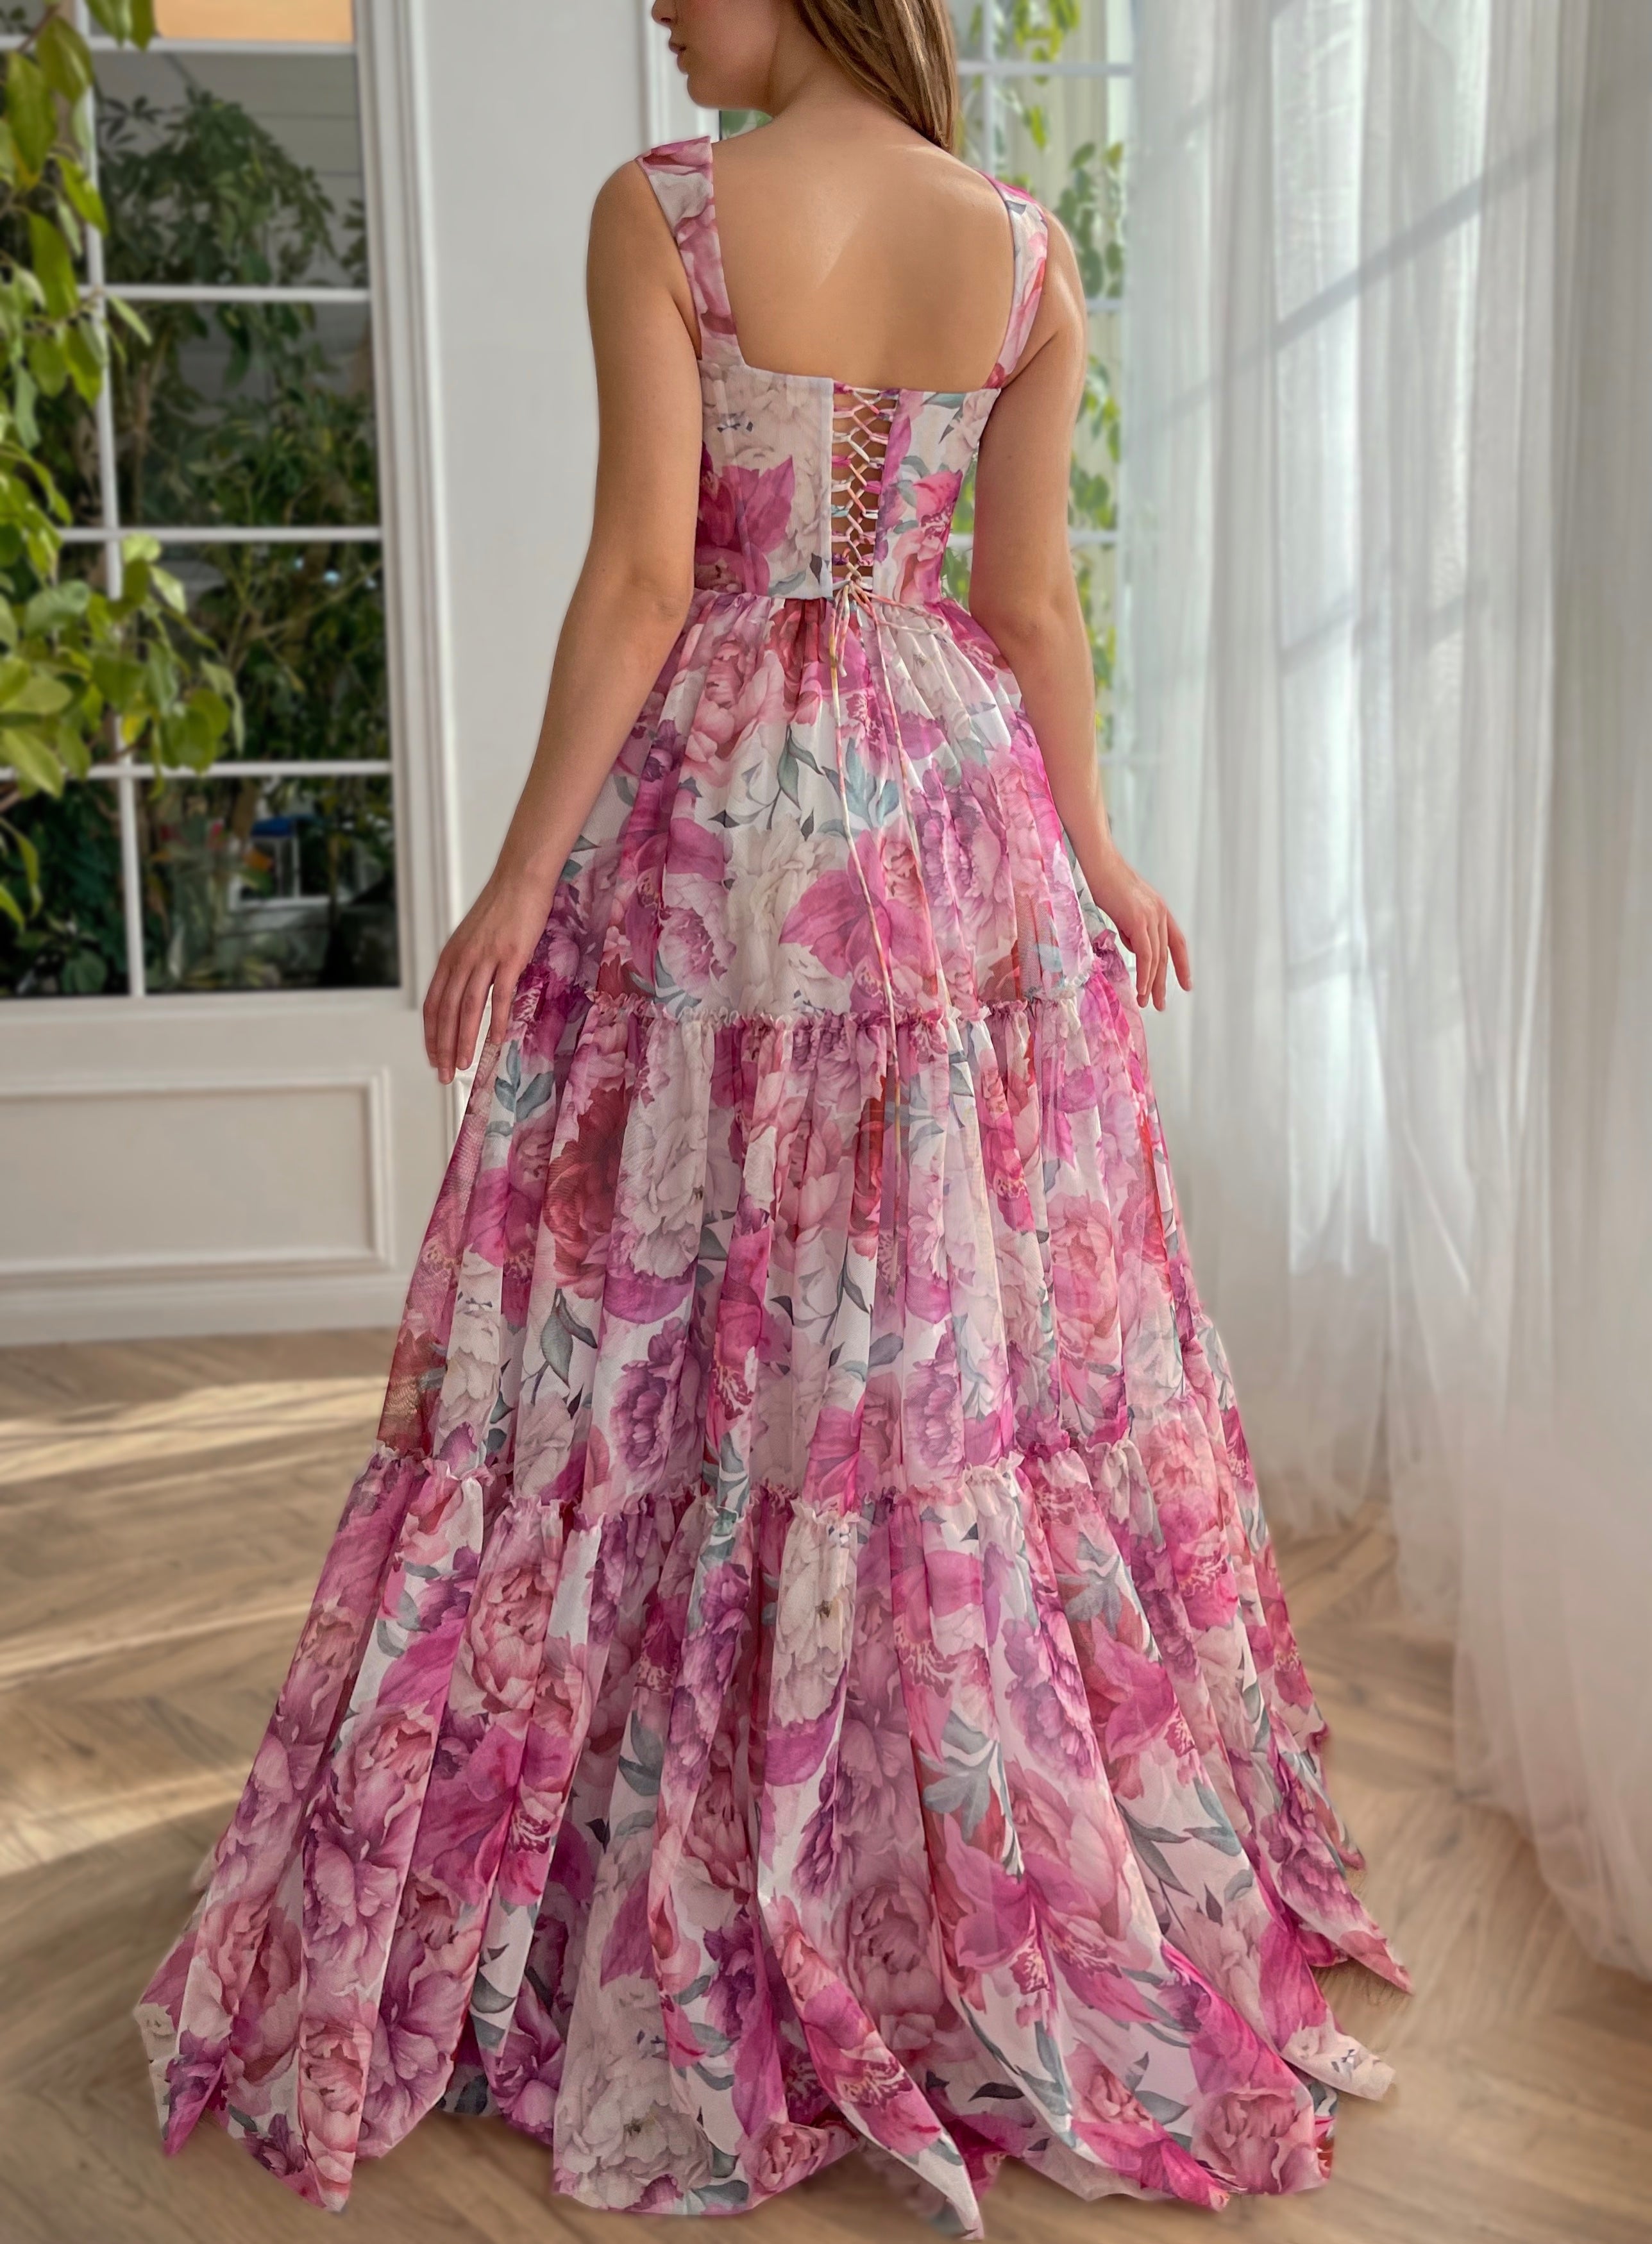 Pink A-Line dress with printed flowers and straps